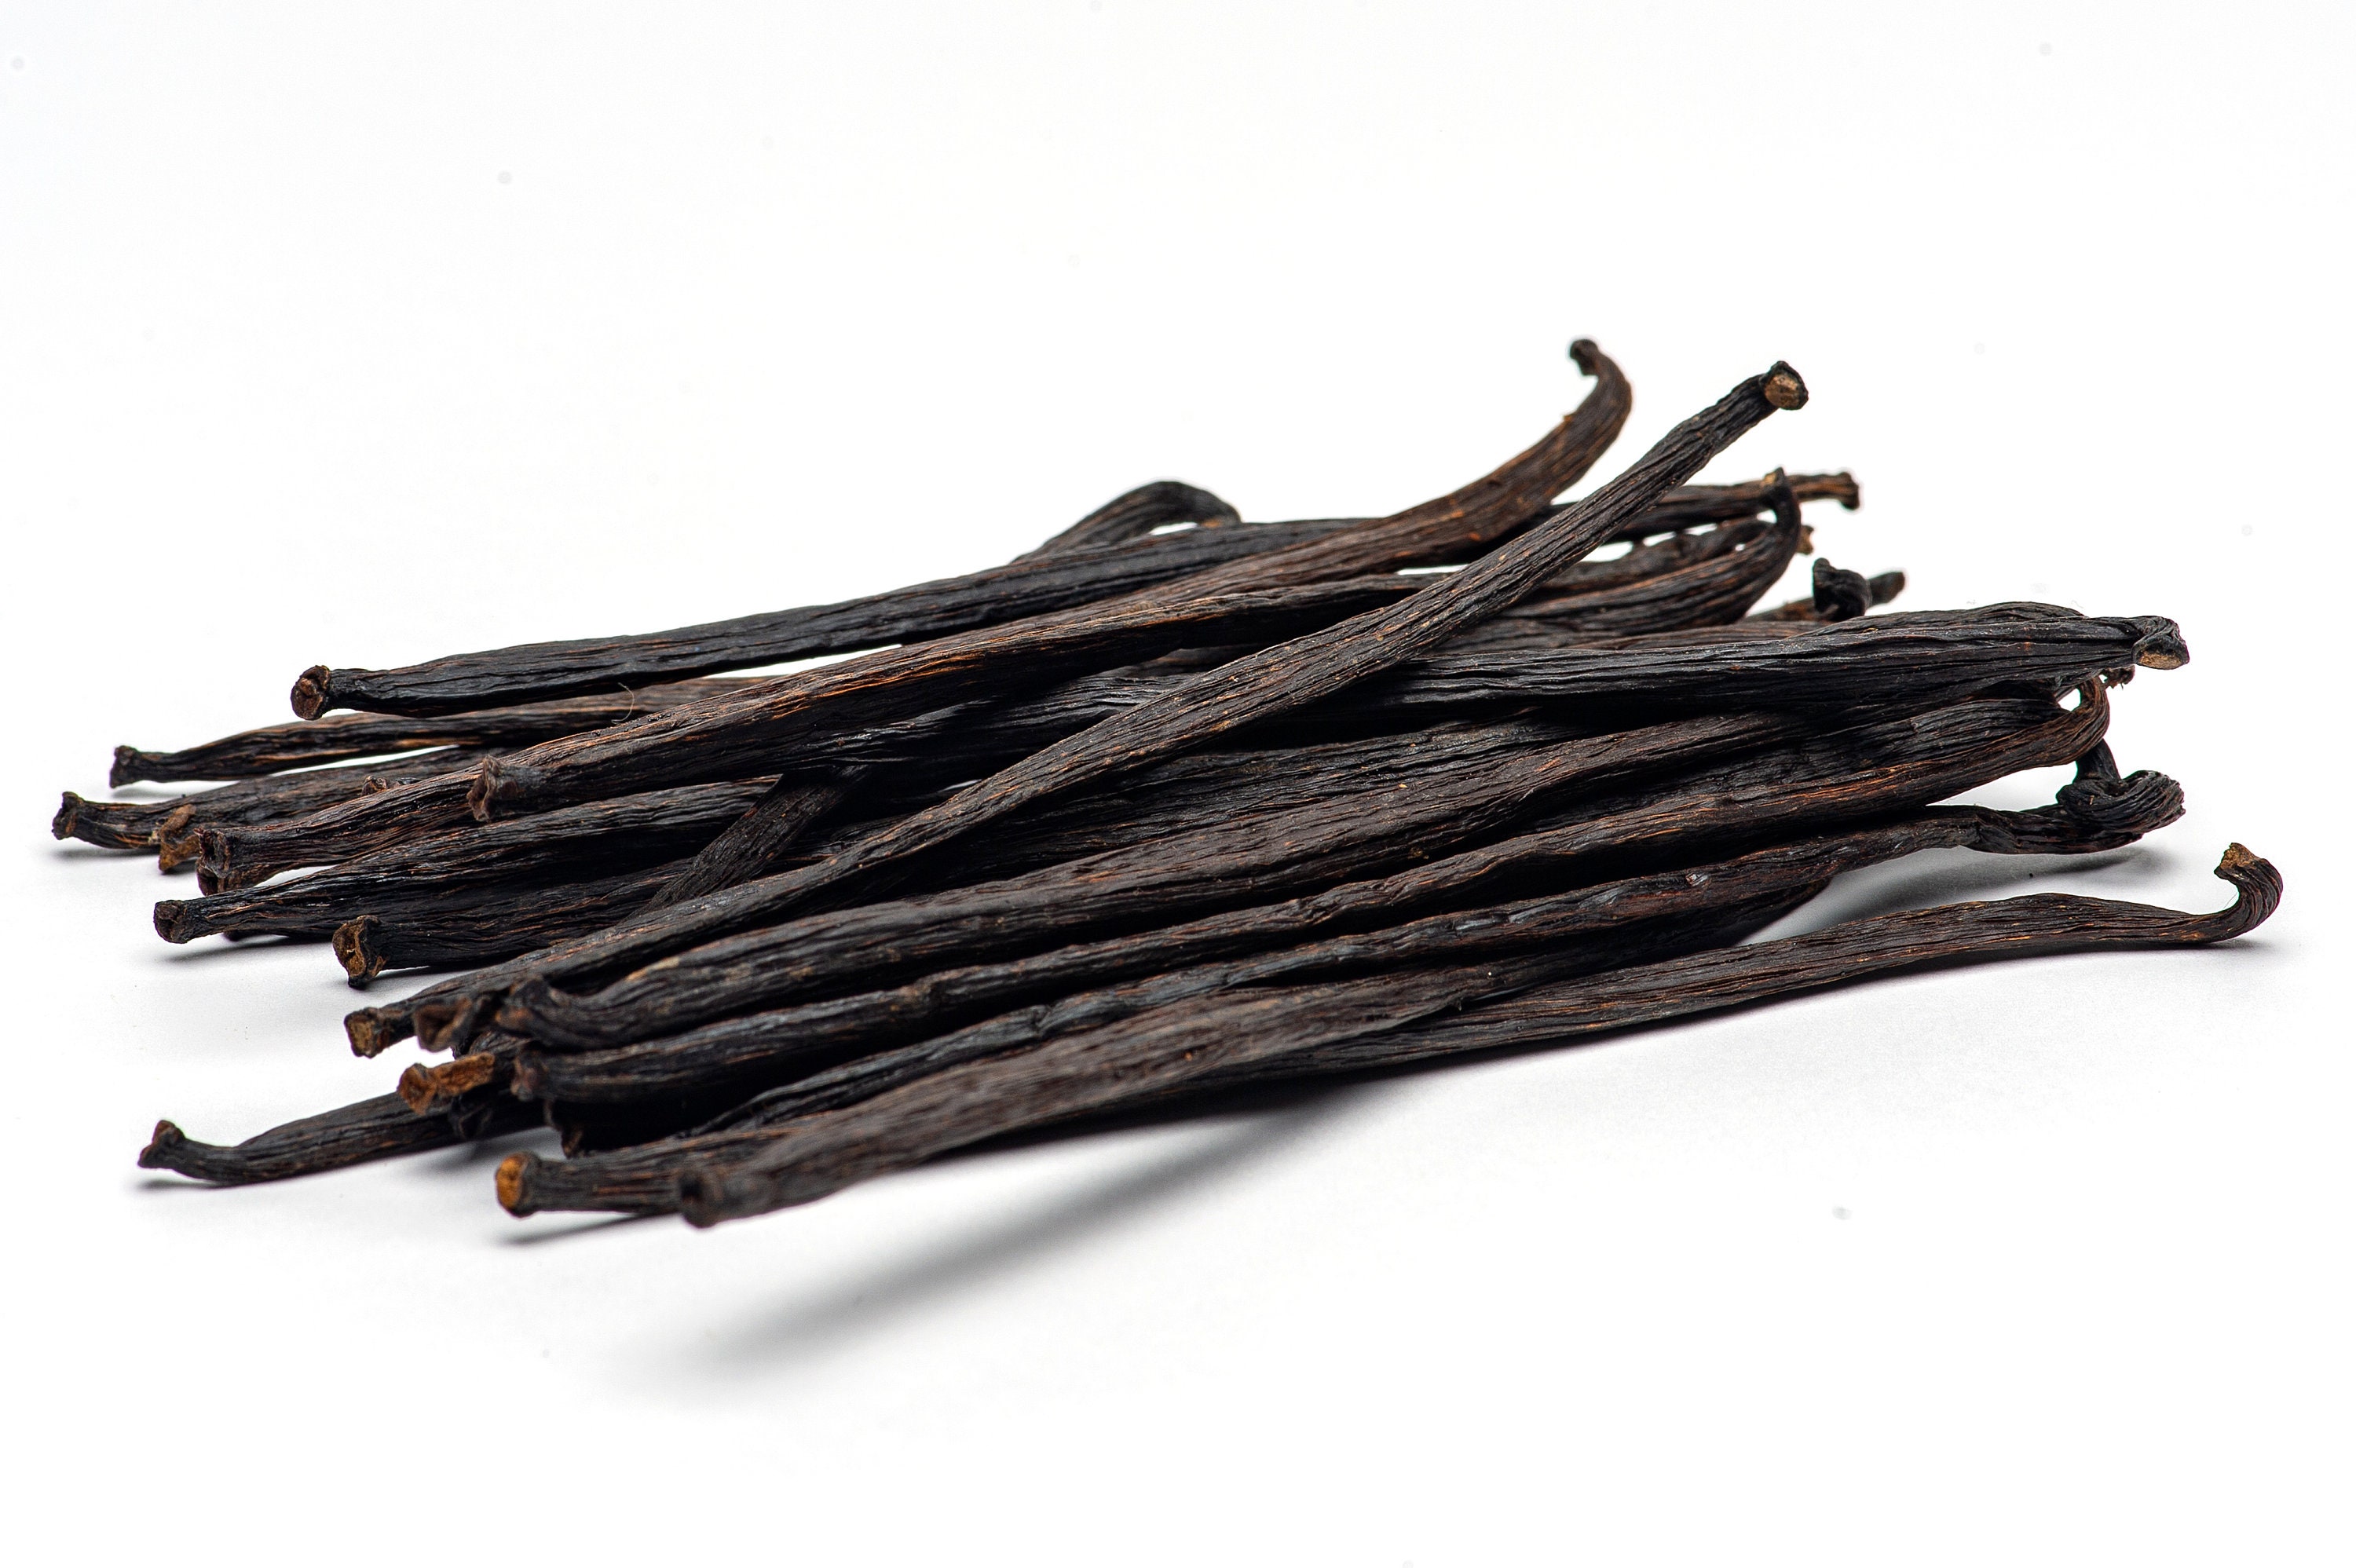 How Vanilla Beans Are Used in Aromatherapy & Beauty Industry - EF&B